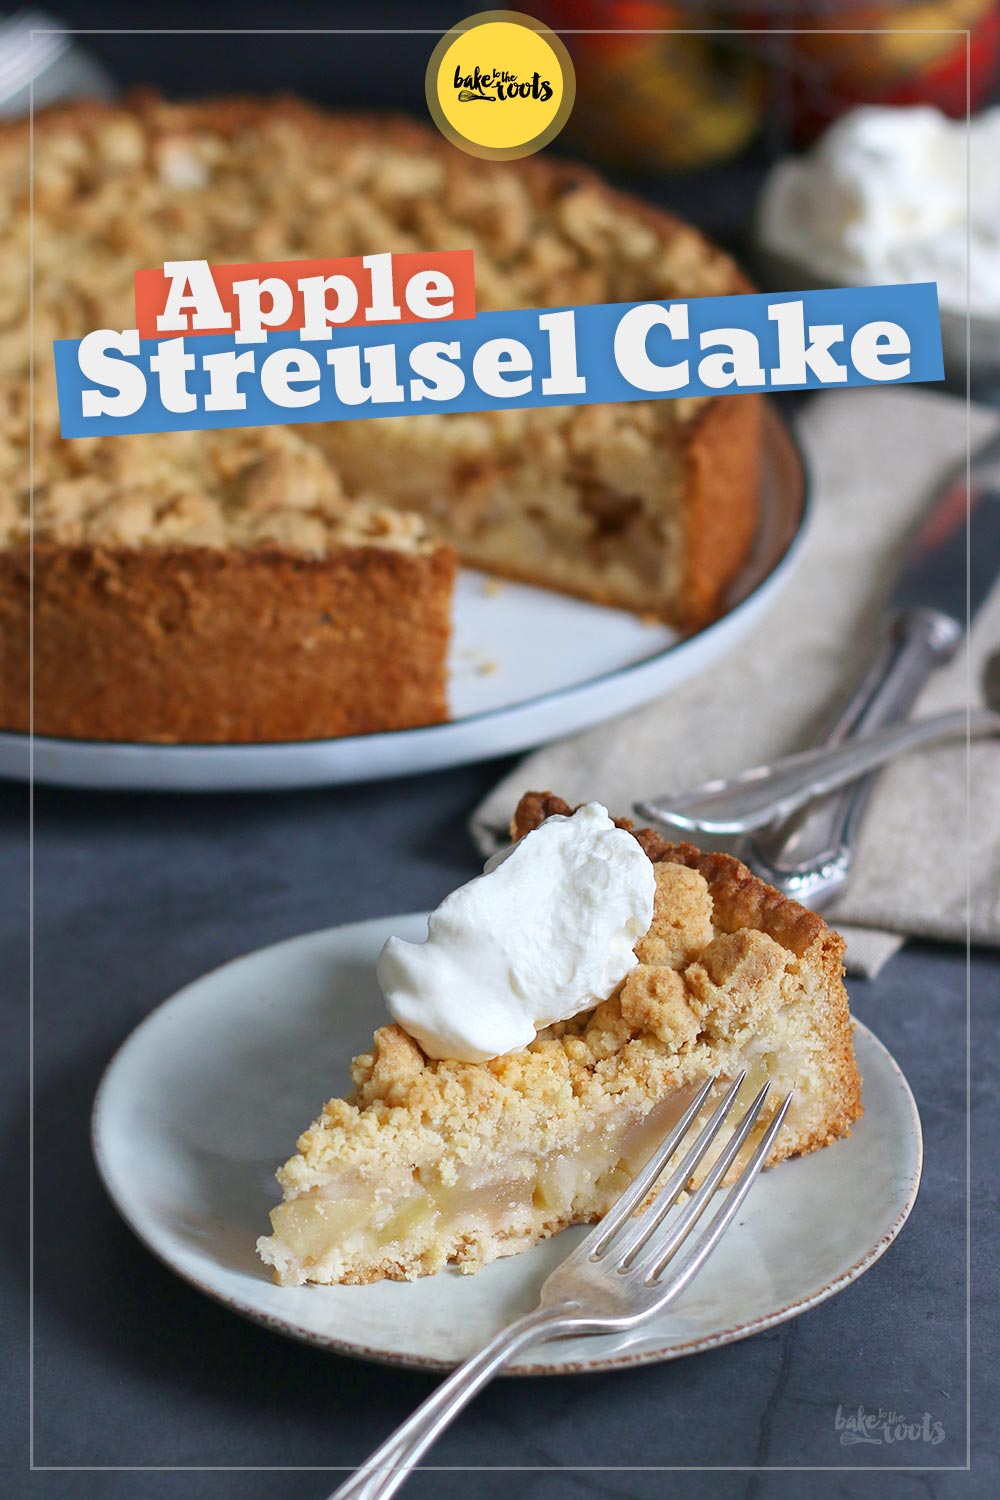 German Apple Streusel Cake | Bake to the roots